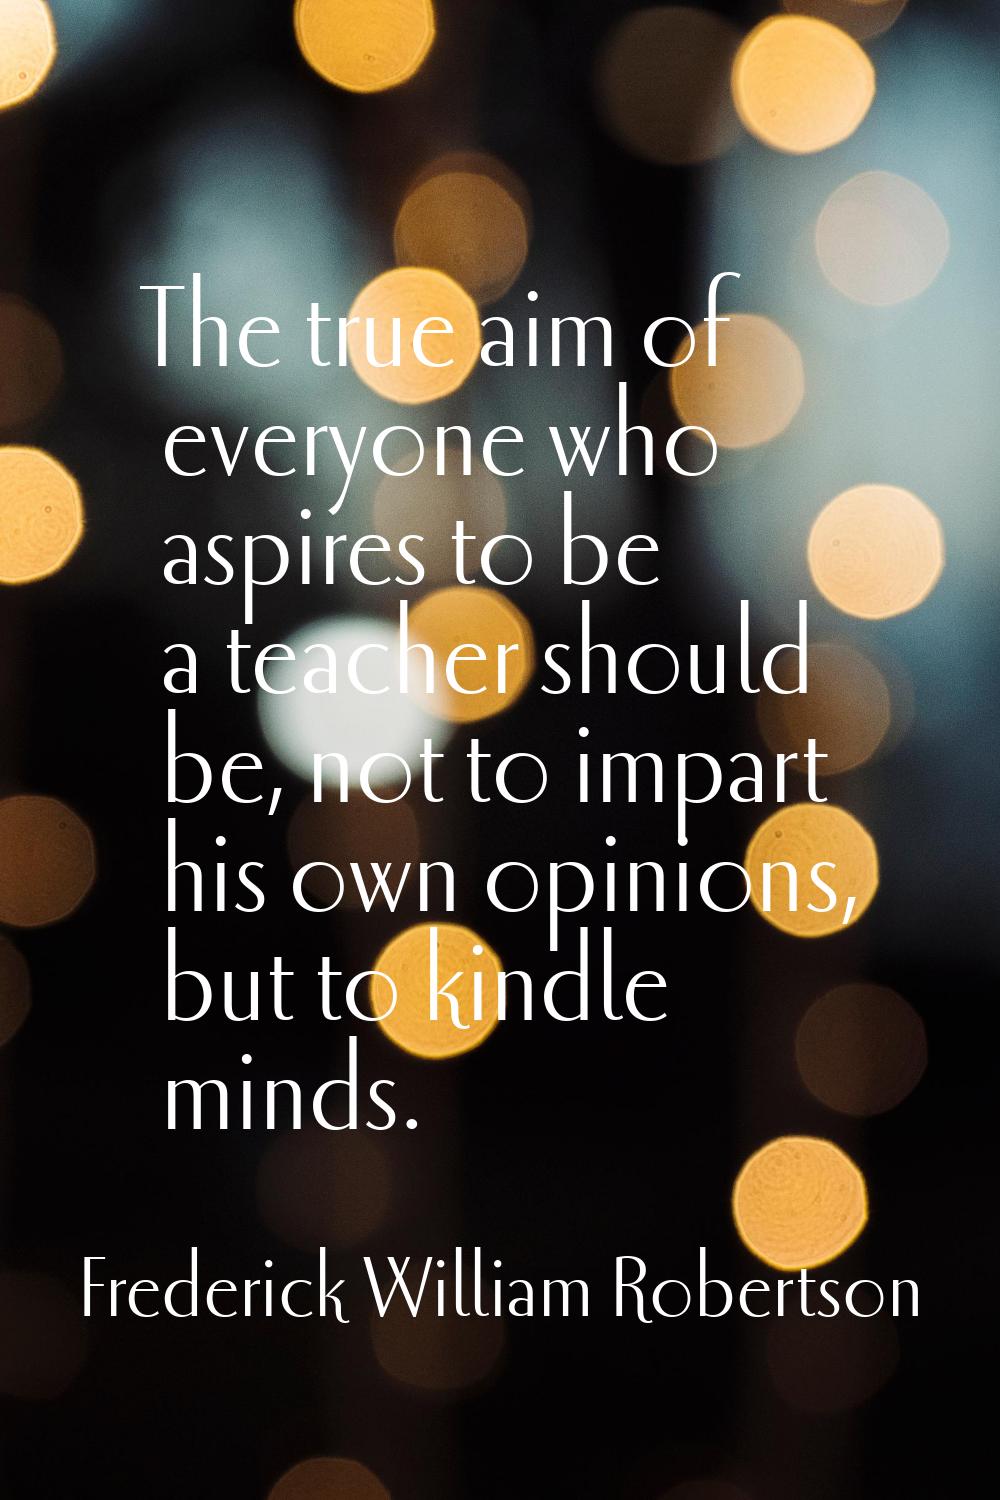 The true aim of everyone who aspires to be a teacher should be, not to impart his own opinions, but